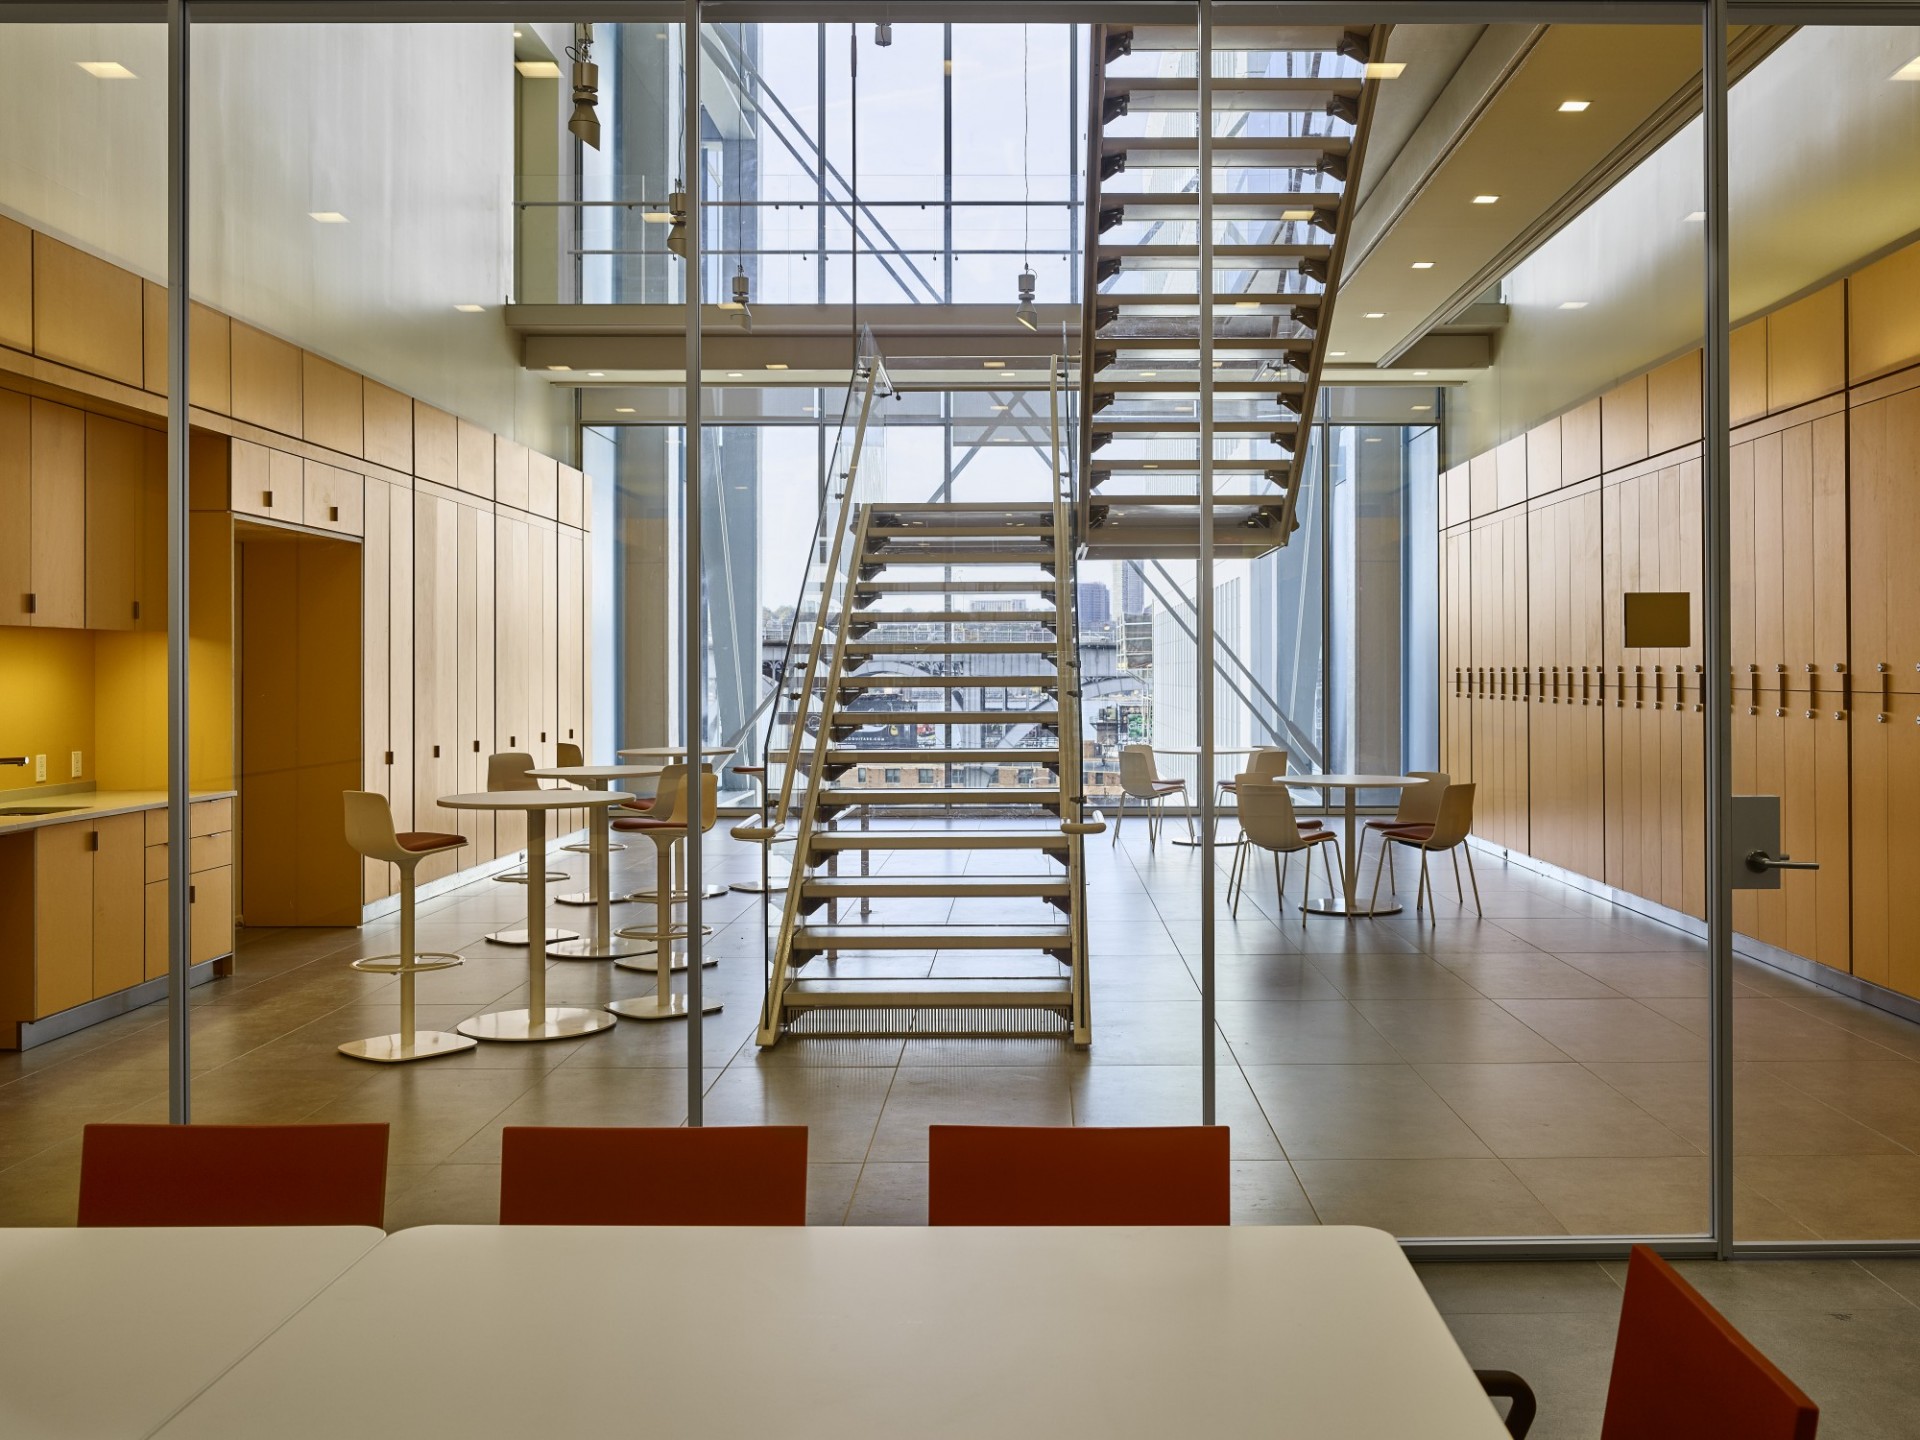 A metal staircase bisects a seating area with wooden chairs